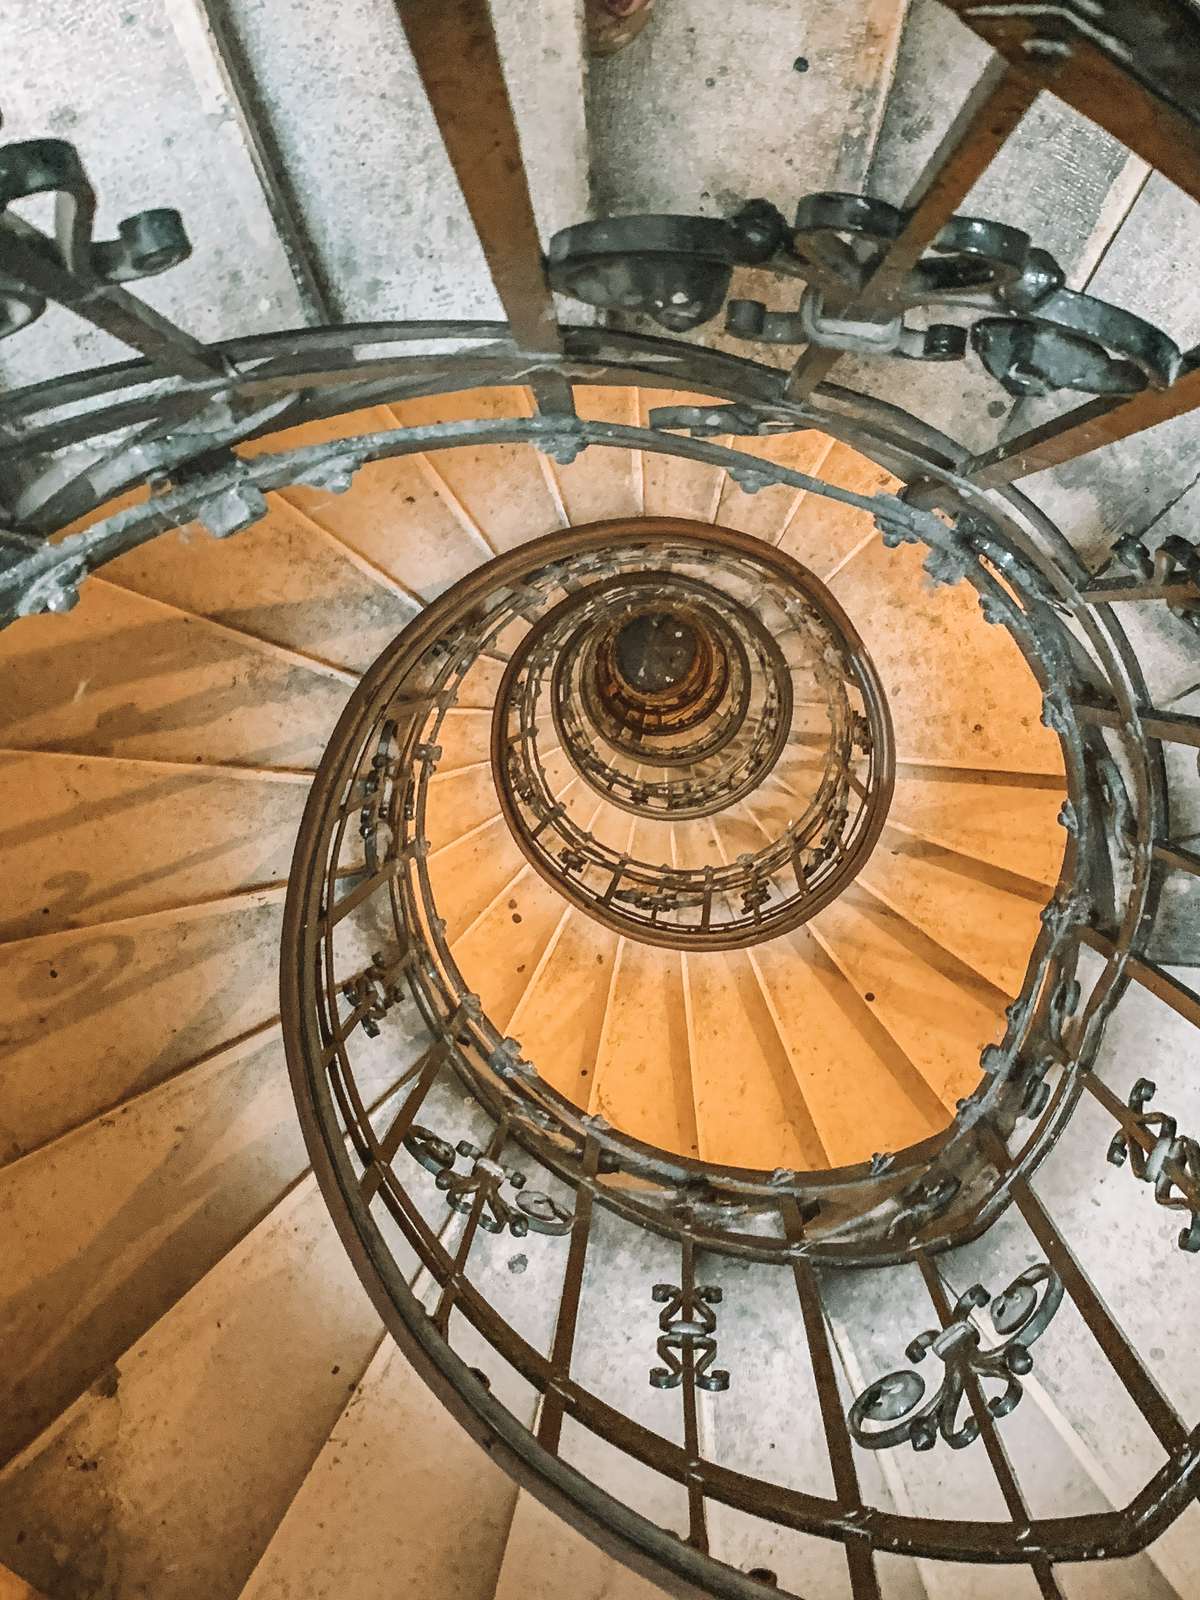 Spiral staircase in St Stephens basilica